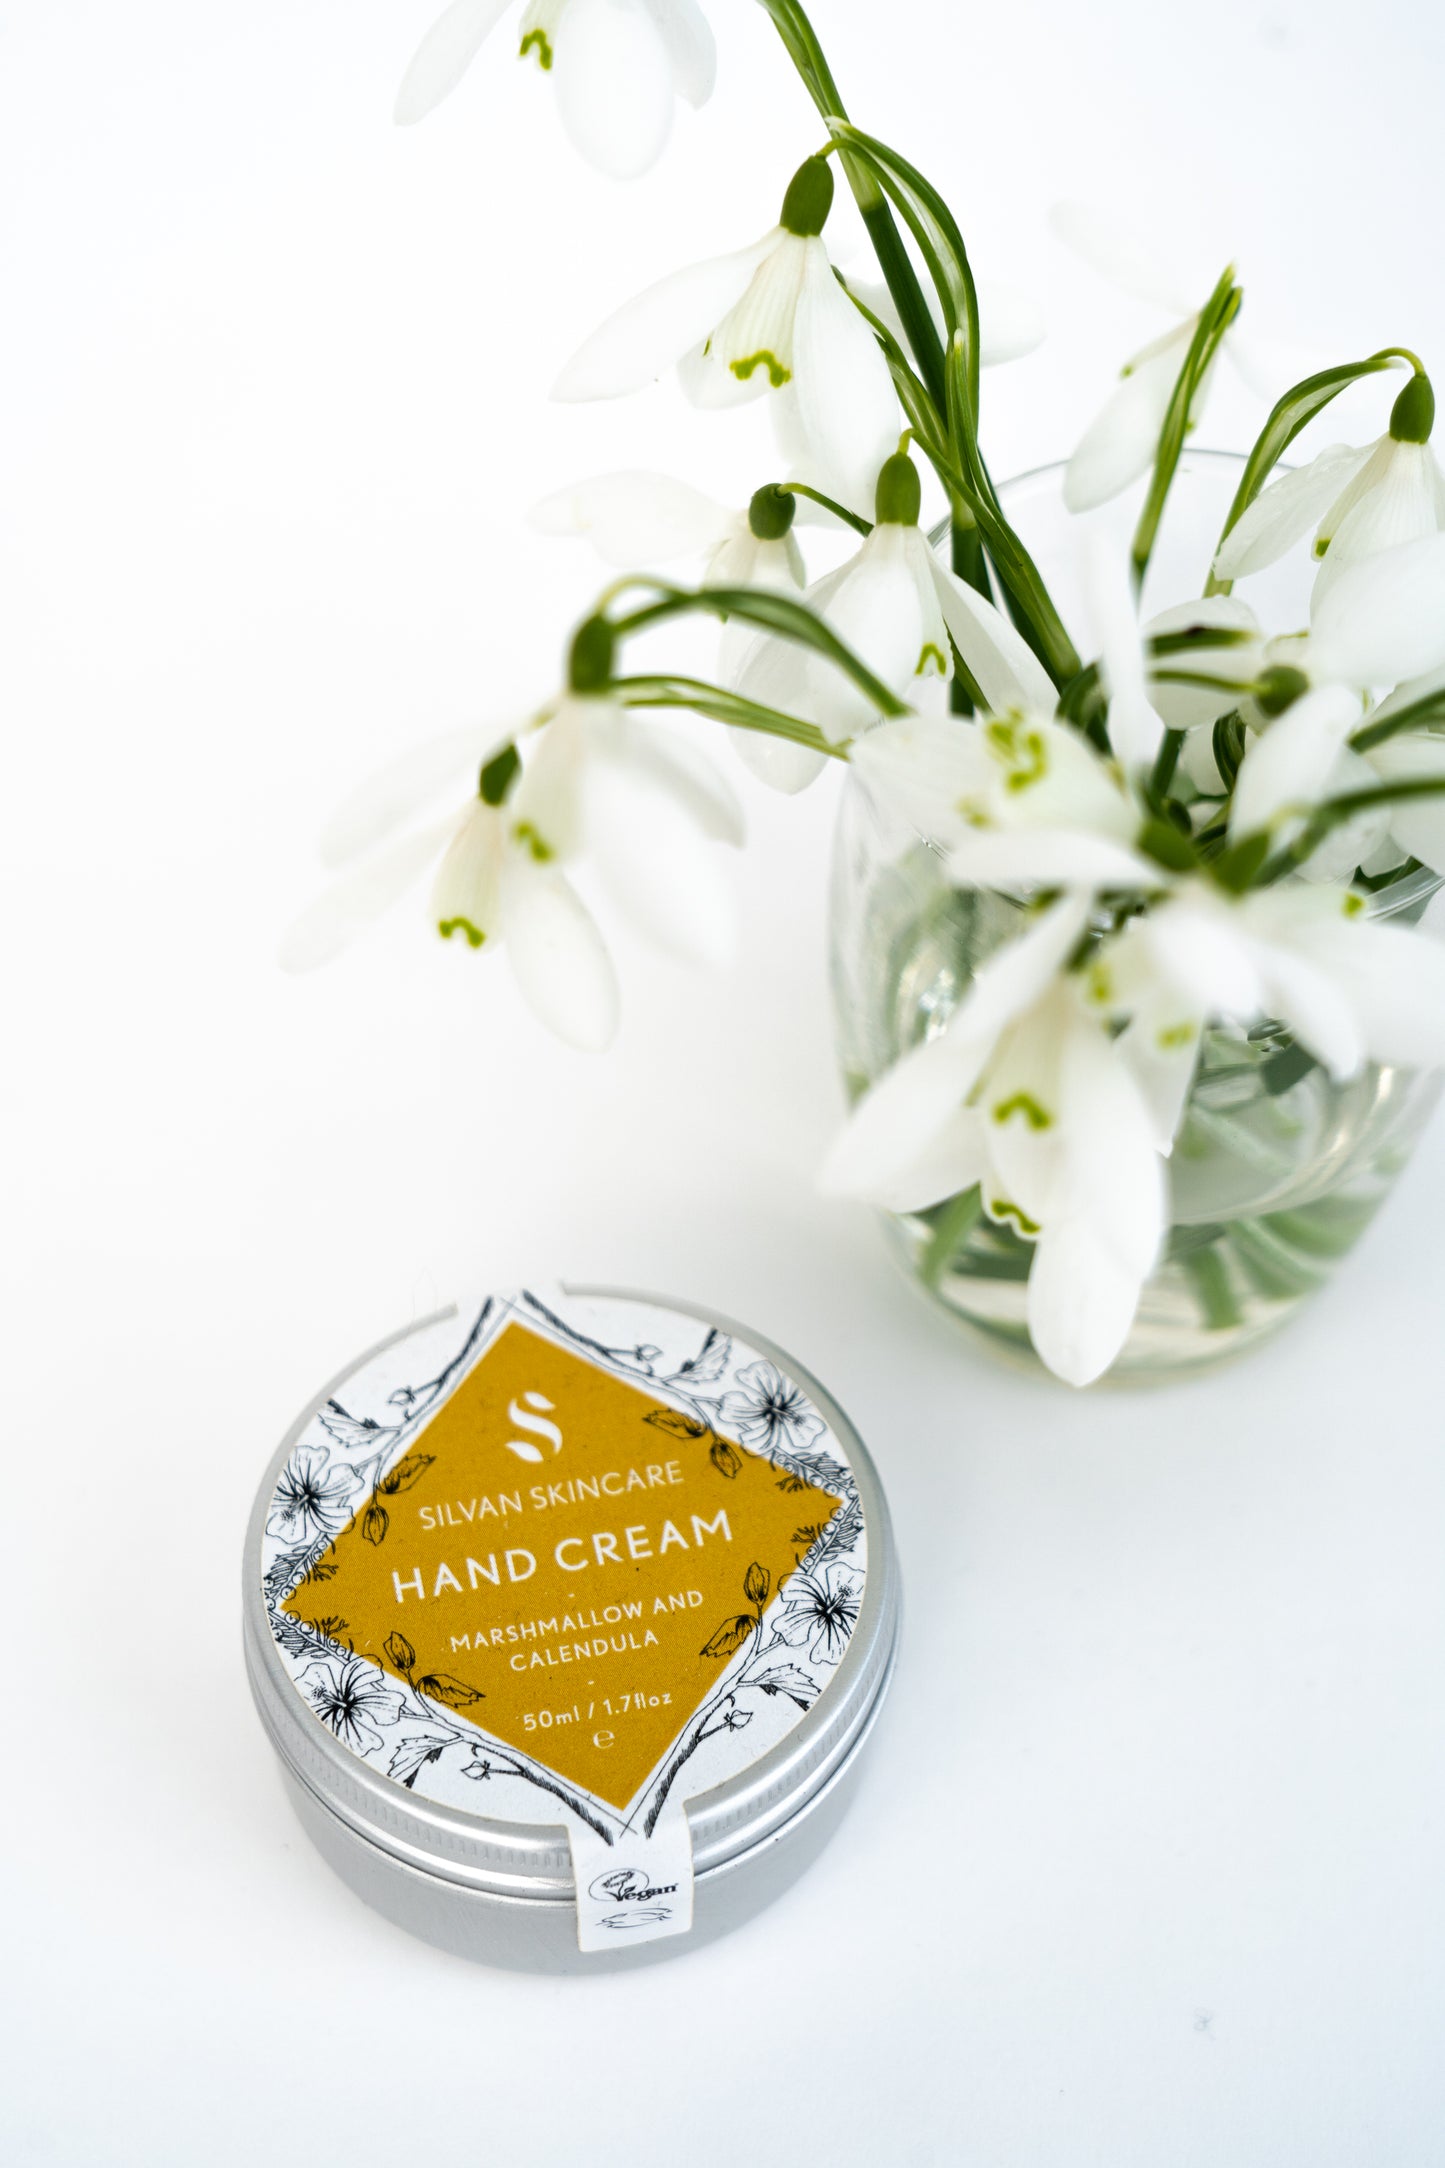 silvan skincare hand cream on a white background sitting next to a clear glass jar with water and some snowdrop flowers in the vase. the hand cream is in an aluminium pot with a white and yellow labels which reads: silvan skincare hand cream marshmallow and calendula 50ml